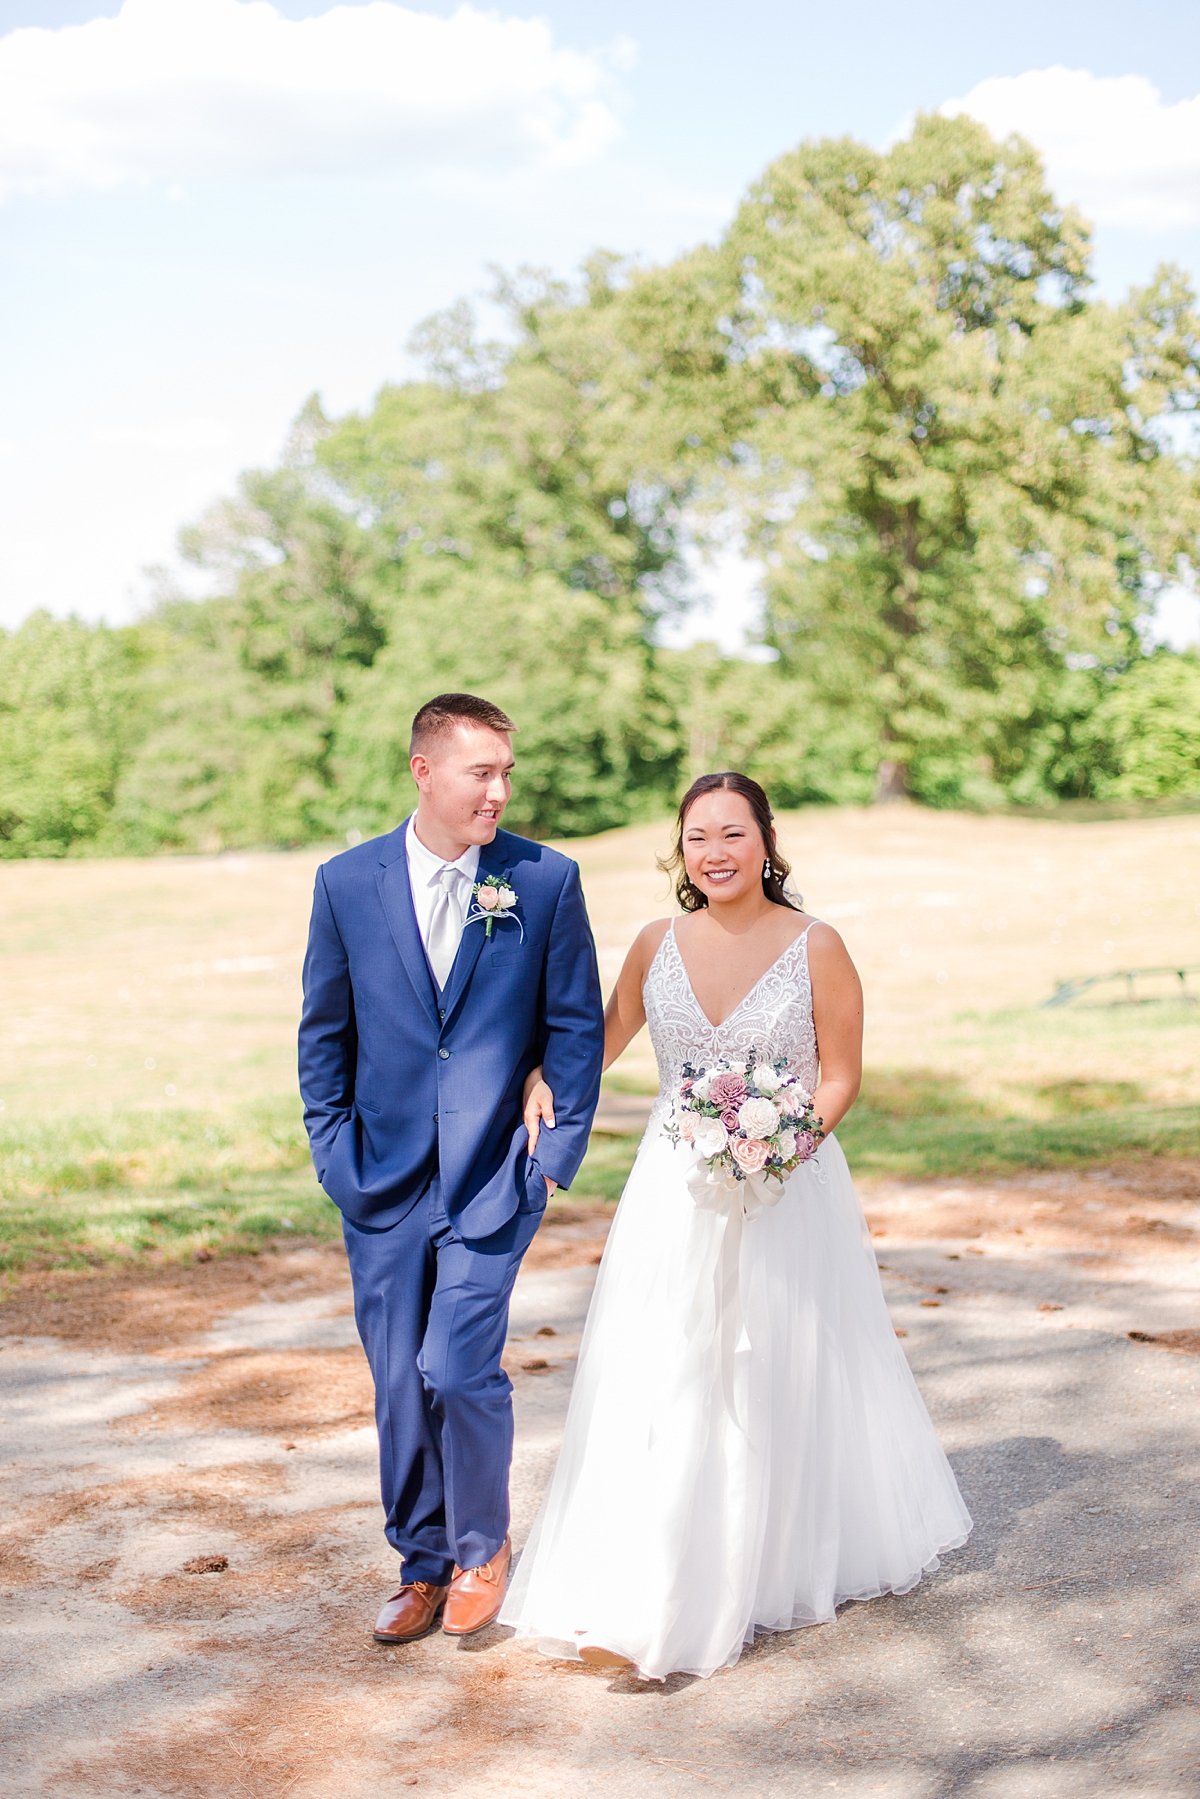 Bride and Groom First Look at Spring Hanover wedding. Hanover Wedding Photographer Kailey Brianne Photography. 